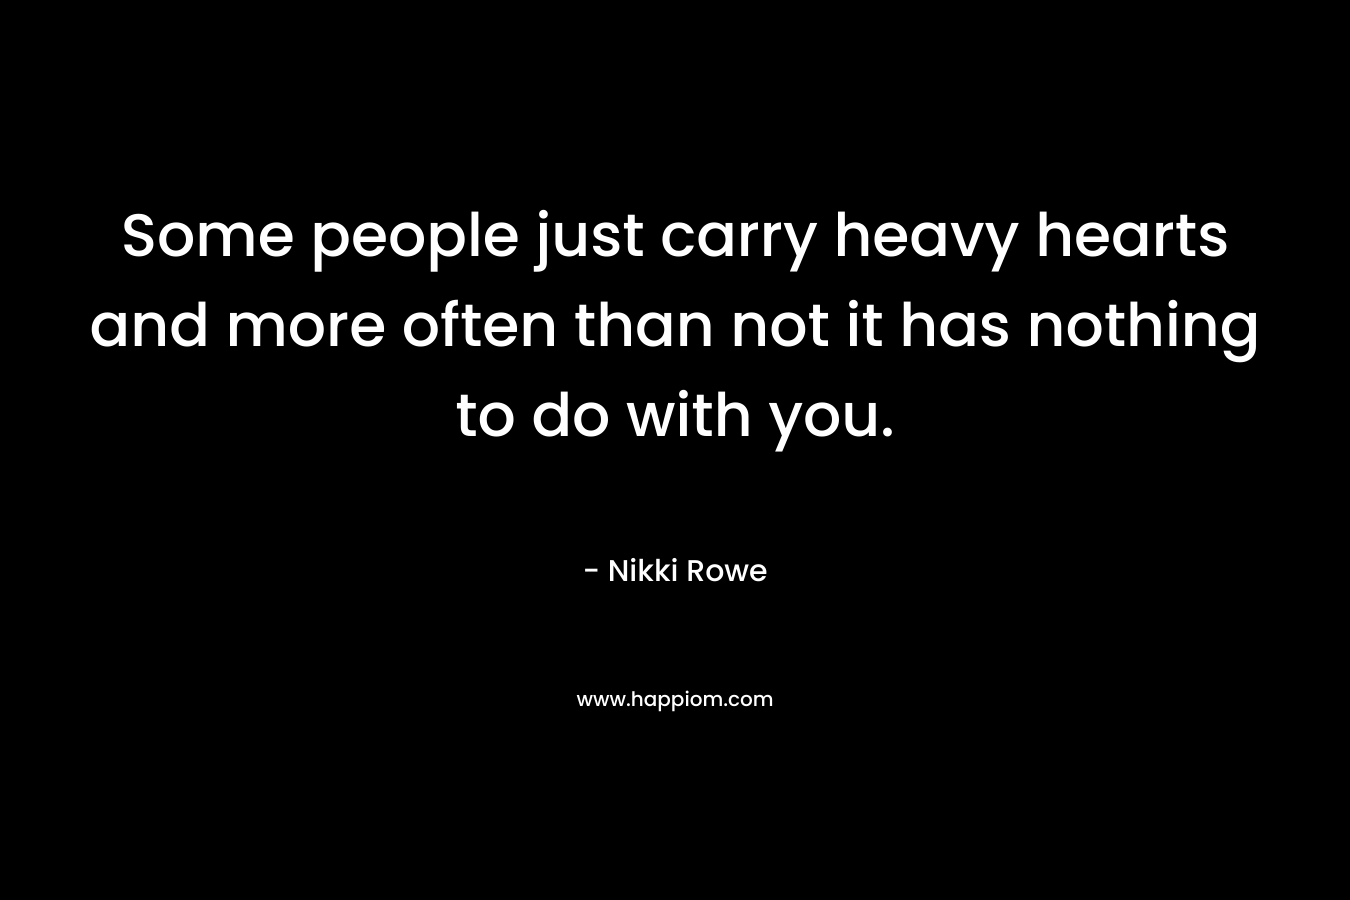 Some people just carry heavy hearts and more often than not it has nothing to do with you.